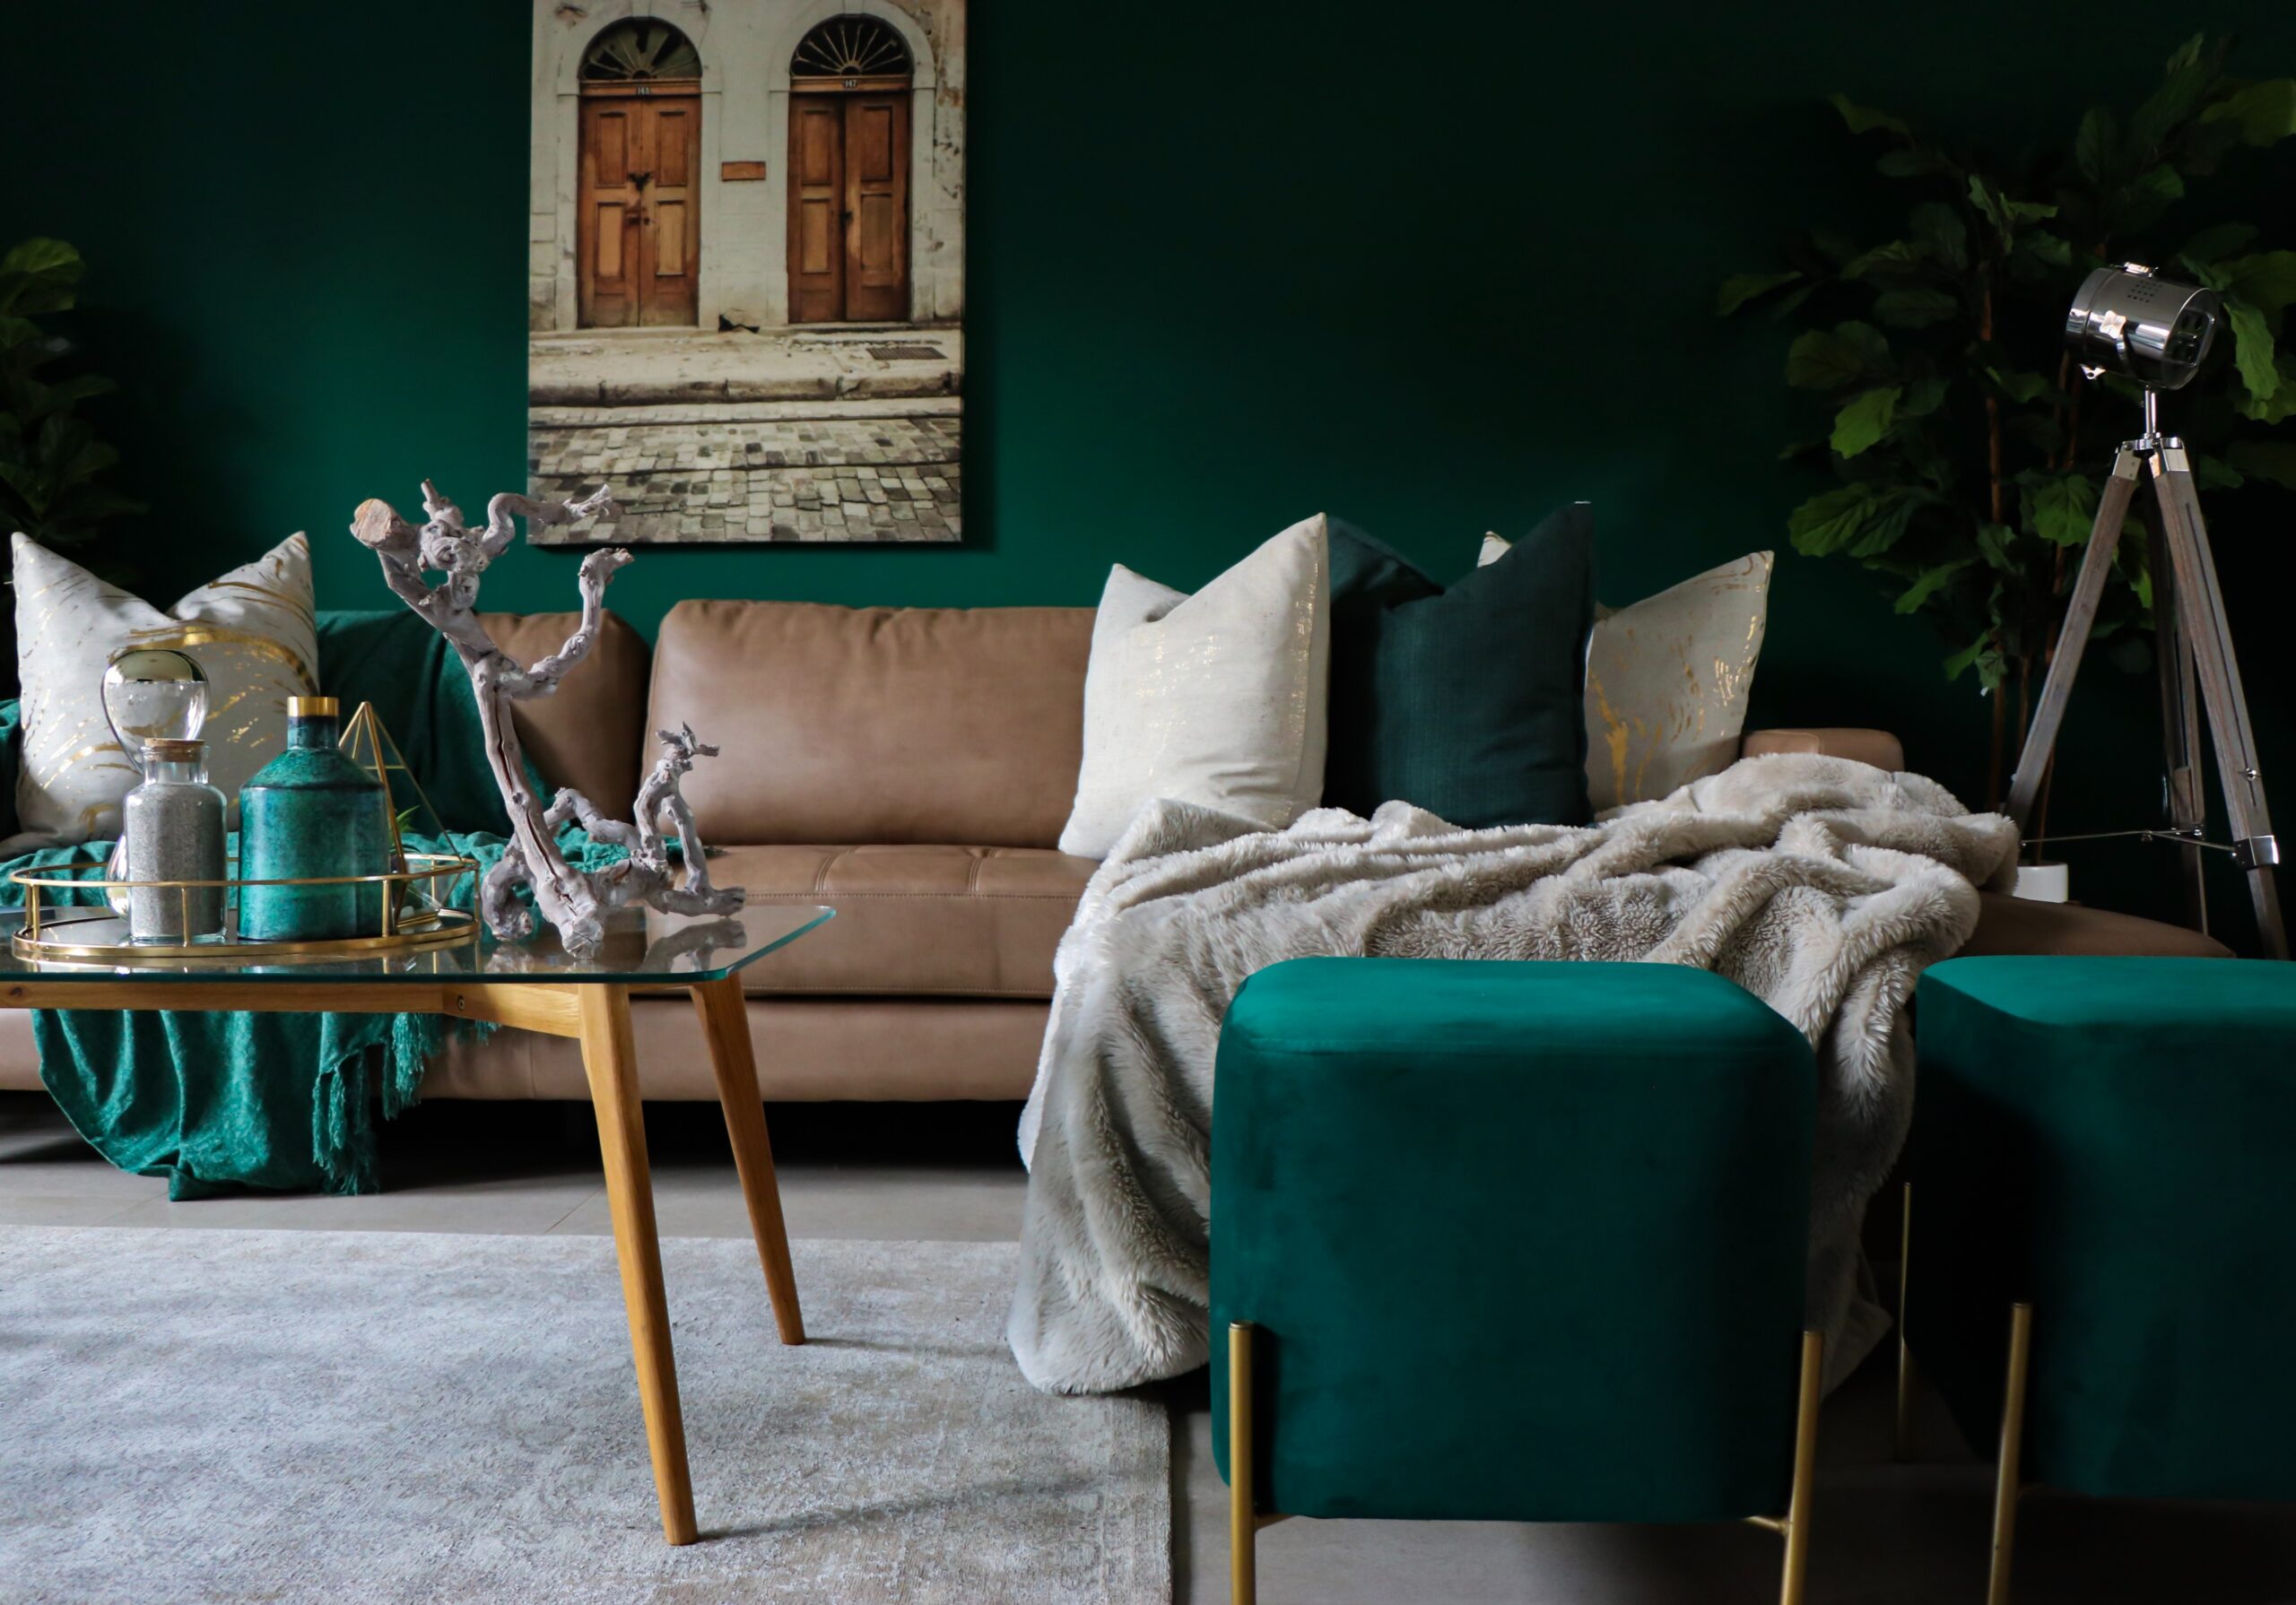 Add some color to your living room space to incorporate feng shui practices. Pictured: A green living room.